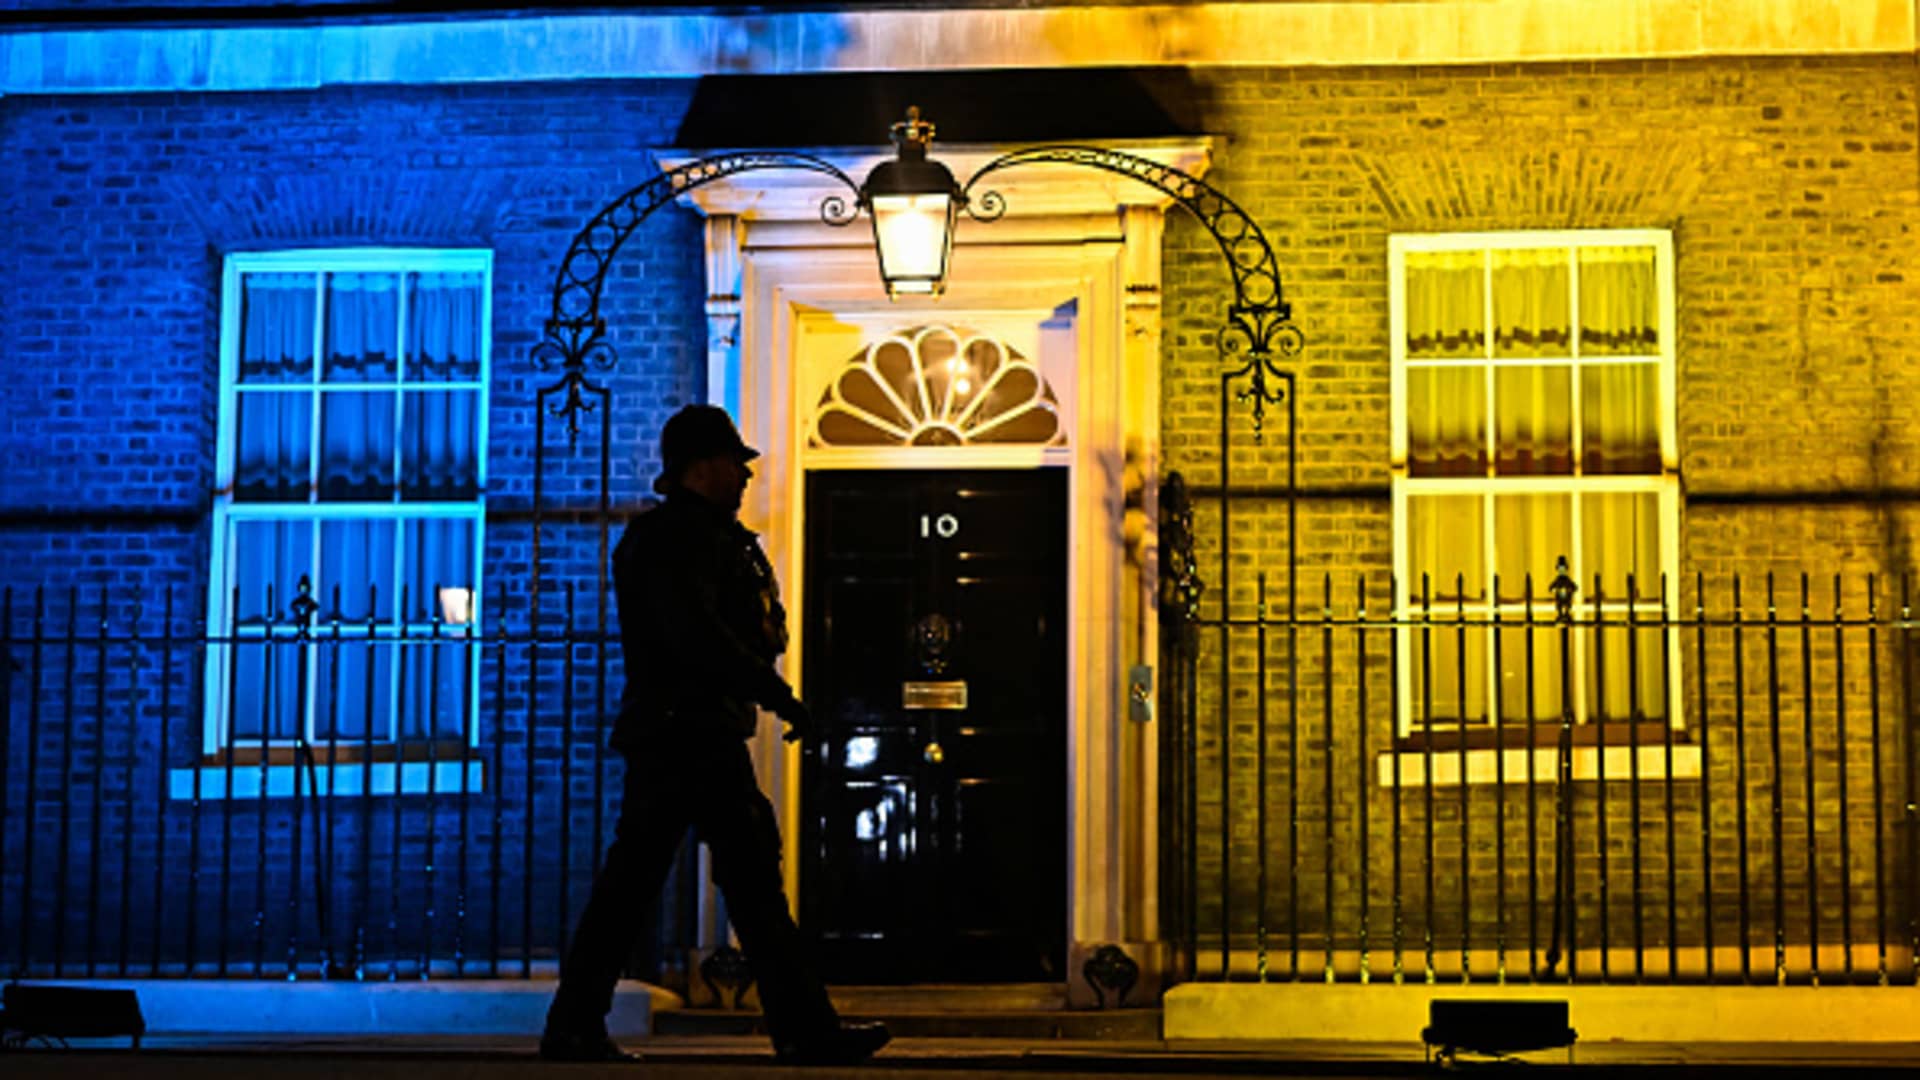 The front of 10 Downing Street, the residence of British Prime Minister Boris Johnson, is lit up blue and yellow in an expression of solidarity with Ukraine on February 24, 2022 in London, England.